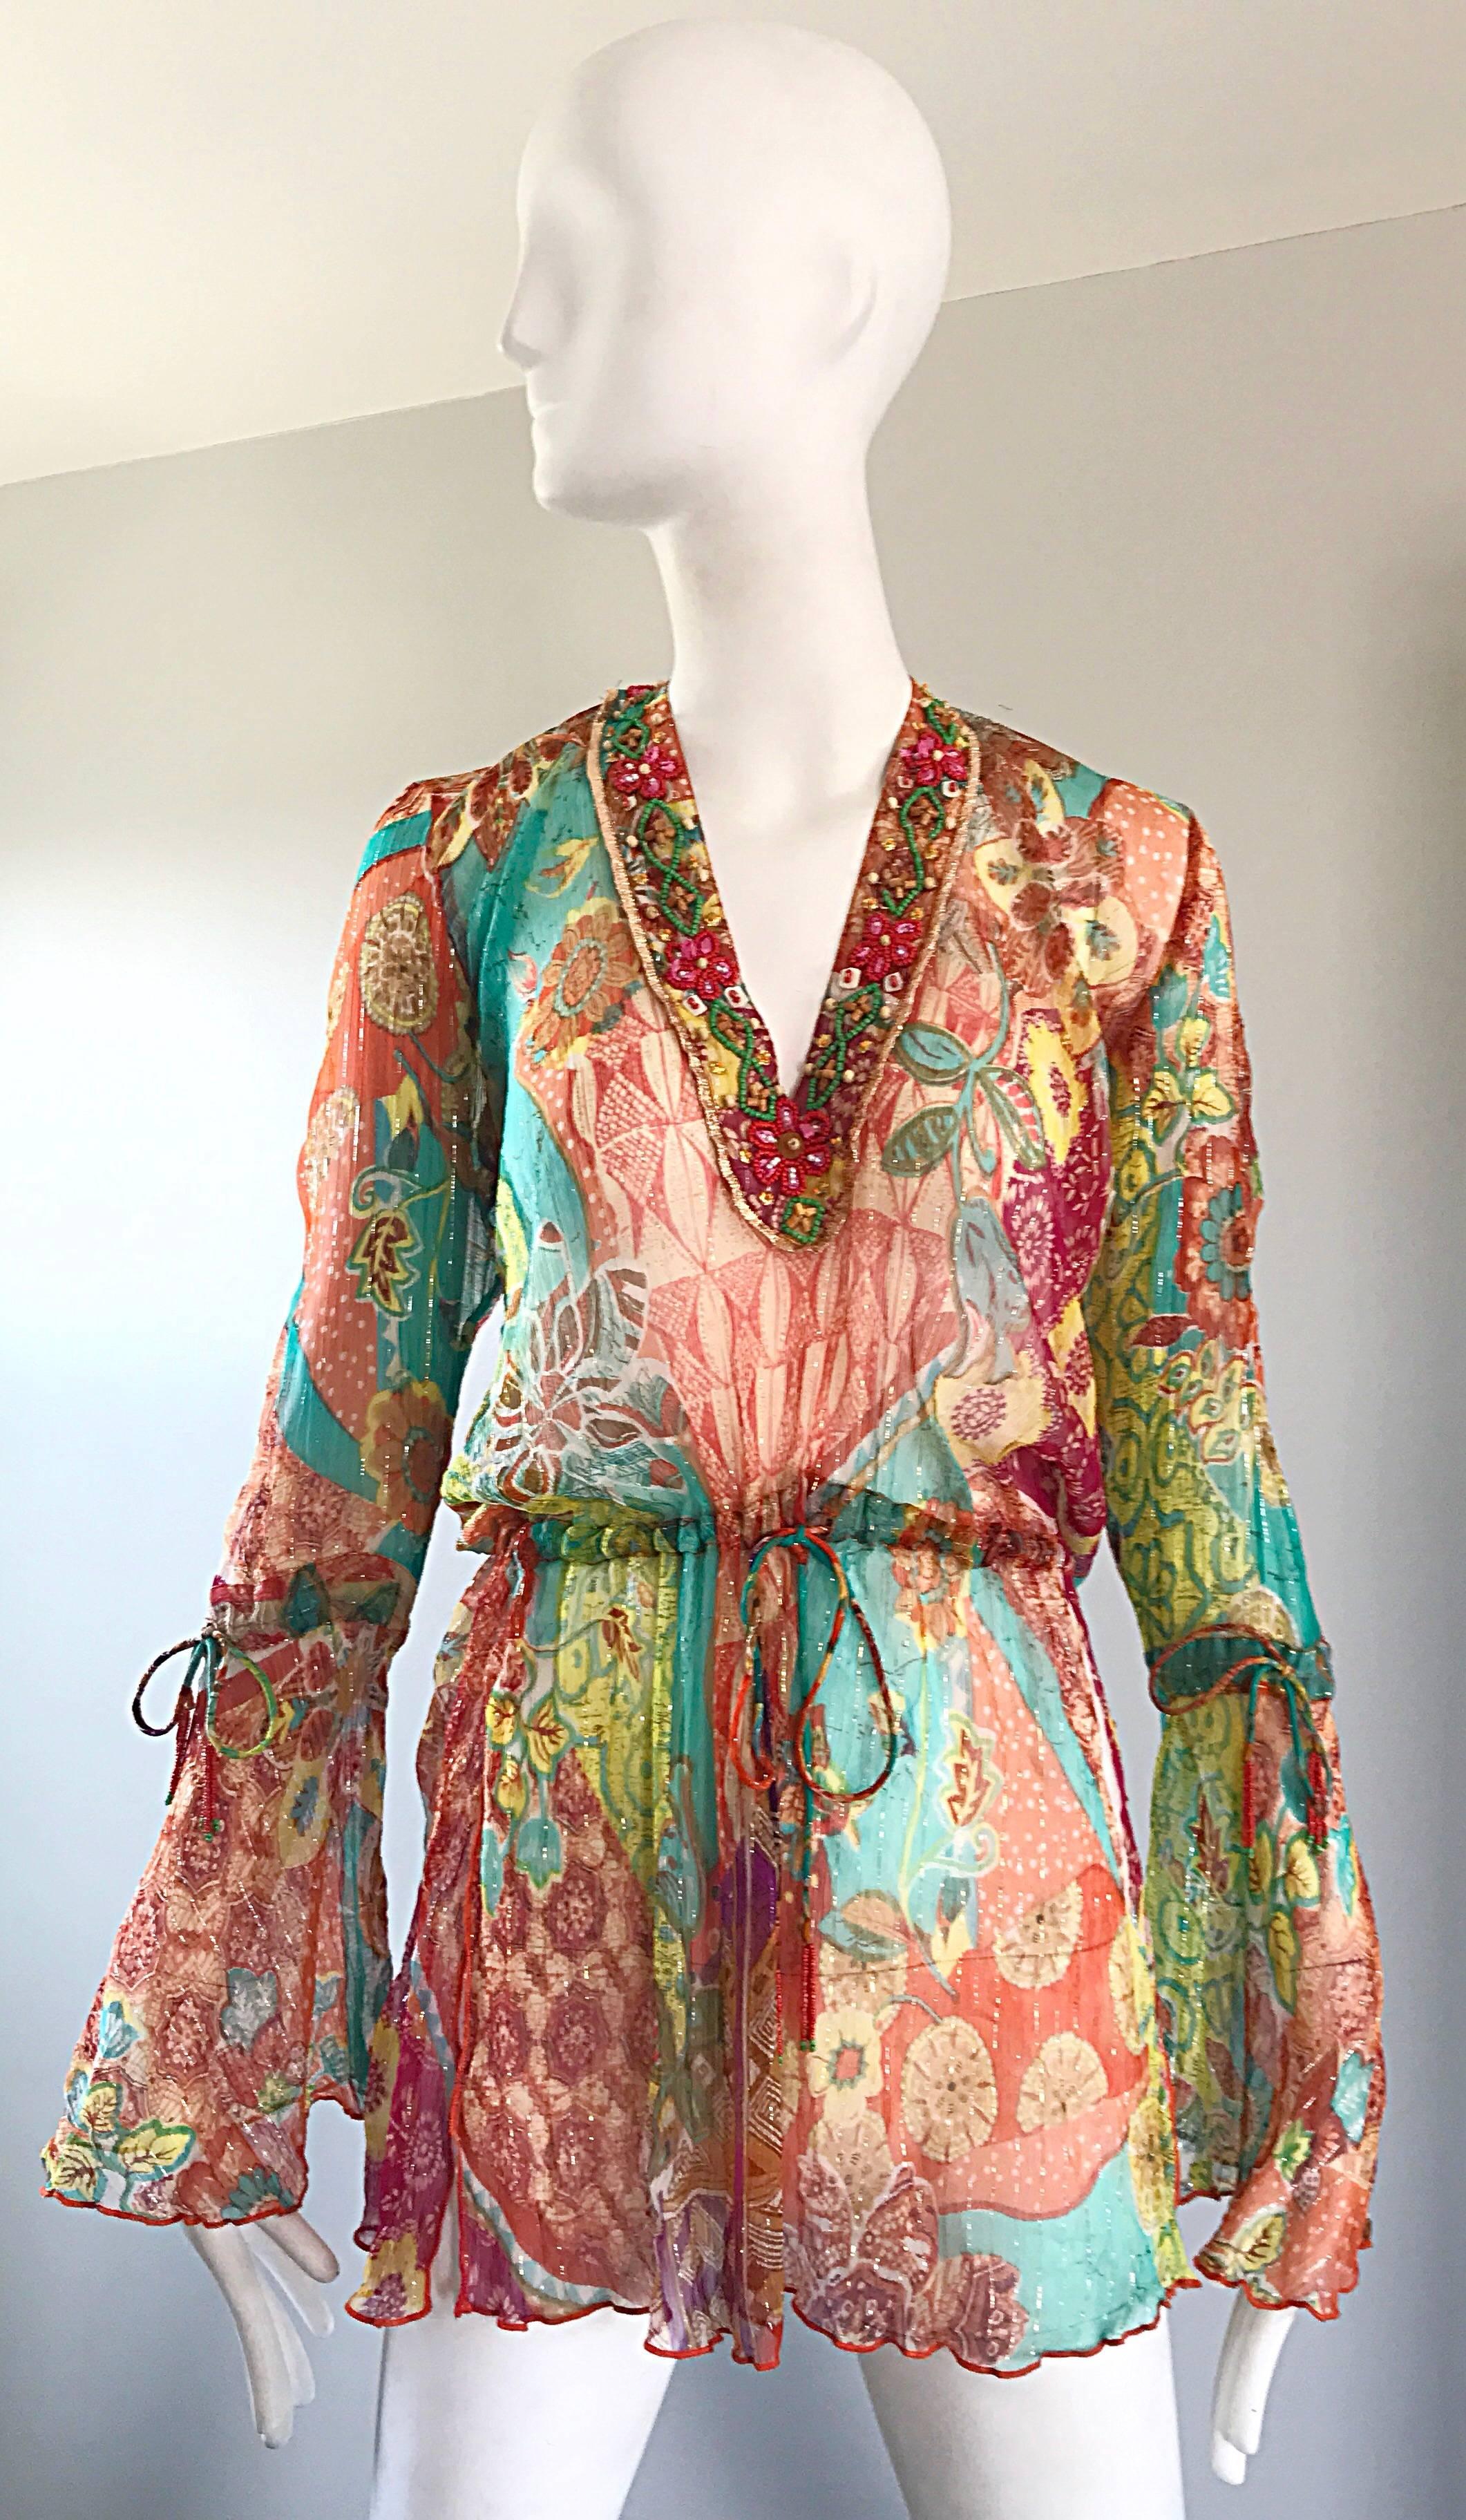 Stunning Vintage 1990s MAURIZIA BYOUX colorful mixed patterned silk chiffon Italian tunic blouse! Features beadwork along the neckline. Bell sleeves have ties below each elbow, at waist, and at top back neck. Side slit at each hip. Can be worn